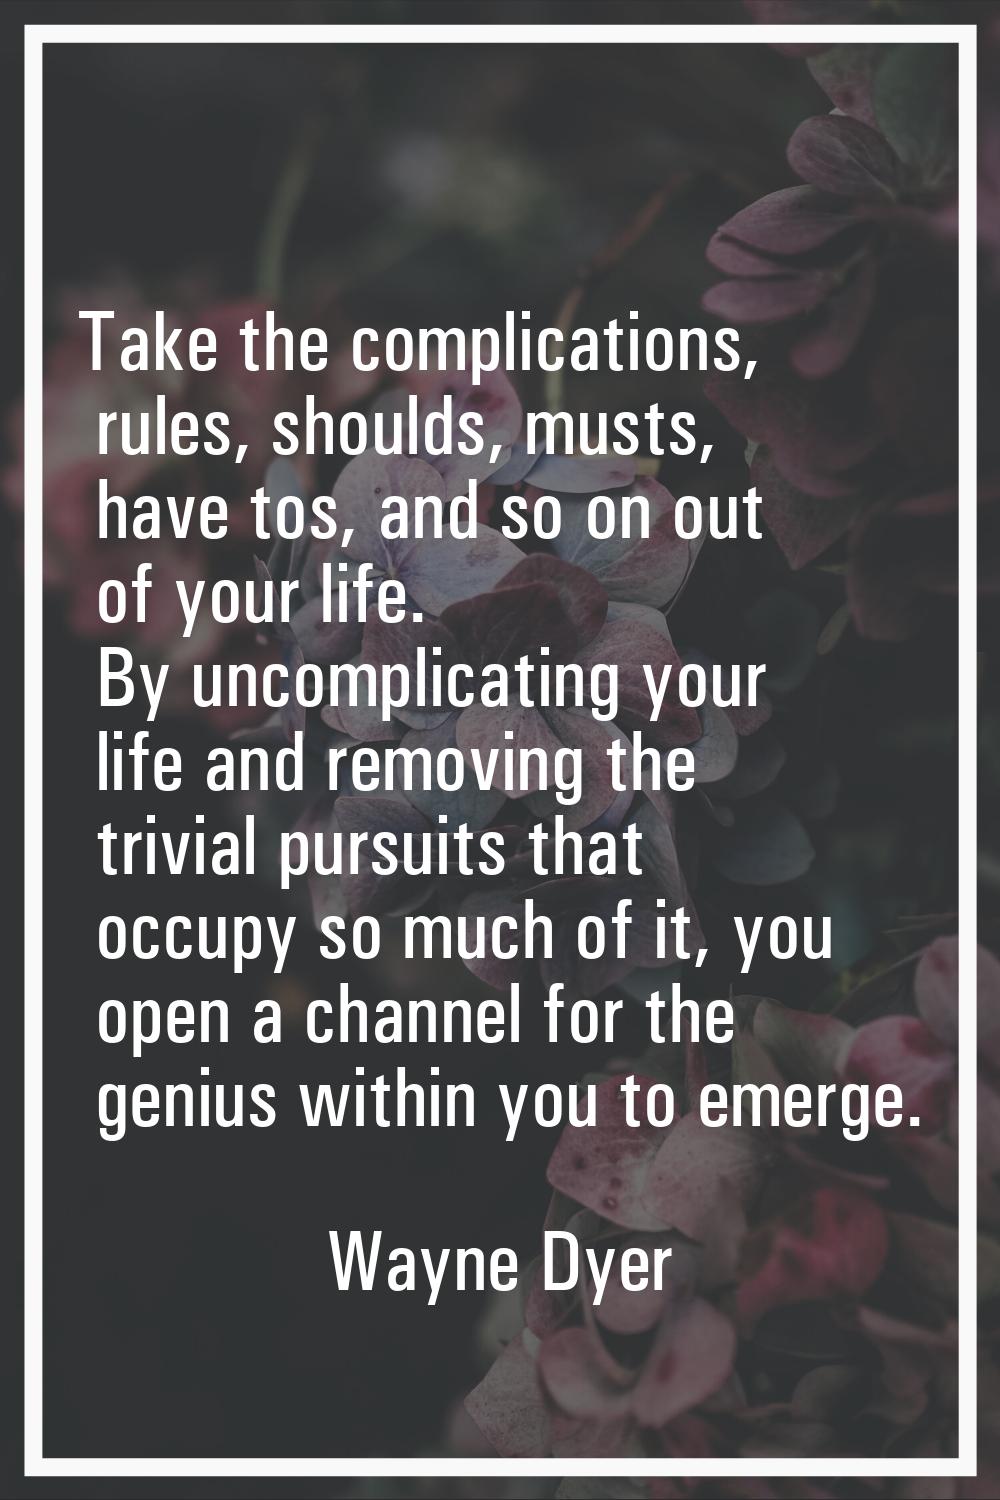 Take the complications, rules, shoulds, musts, have tos, and so on out of your life. By uncomplicat